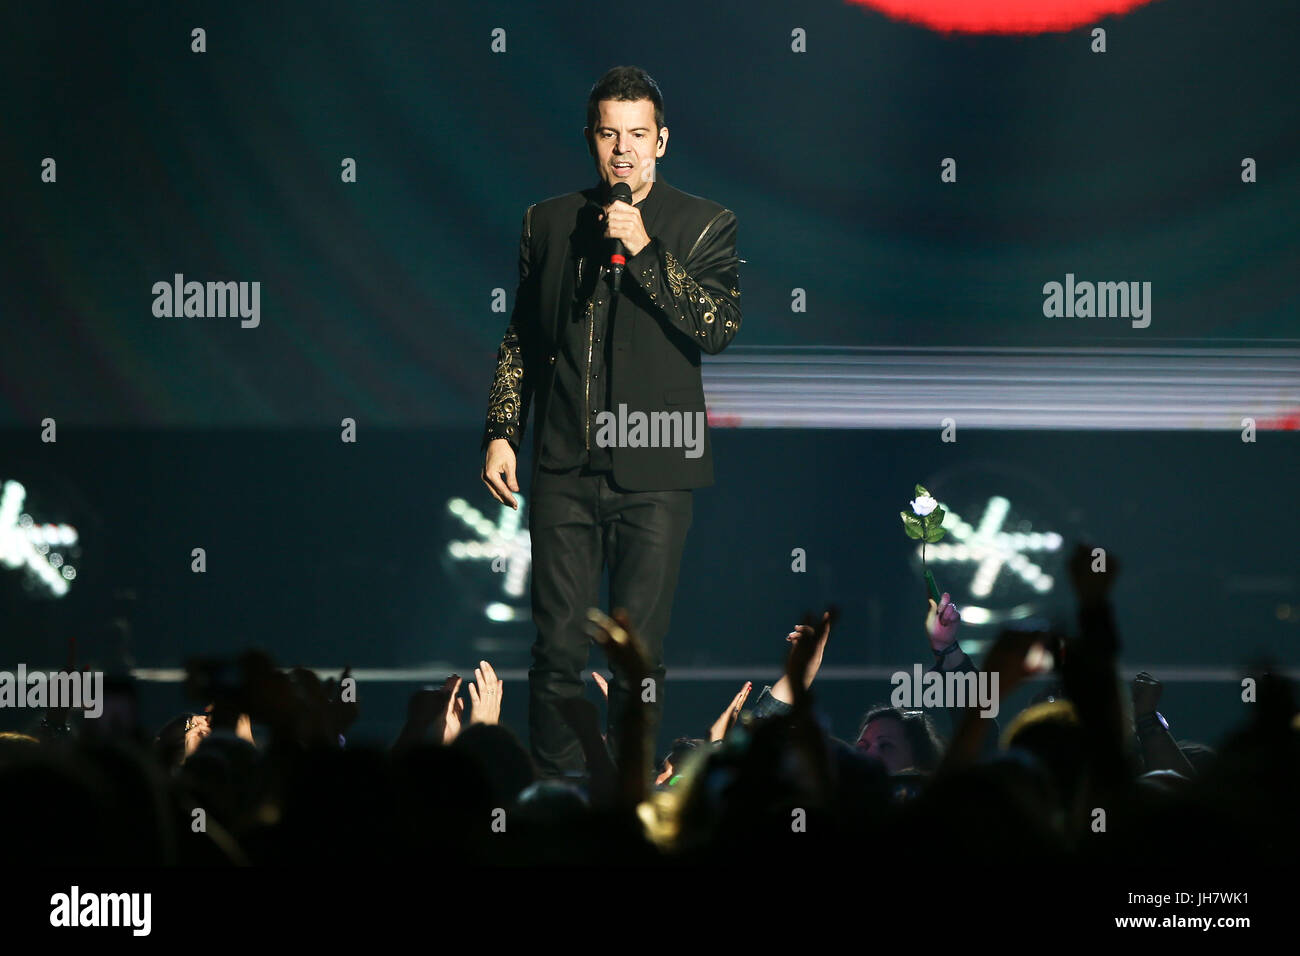 NEW YORK-JUL 7: Jordan Knight of New Kids on the Block perform during The Total Package Tour at NYCB Live at the Nassau Veterans Memorial Coliseum on  Stock Photo